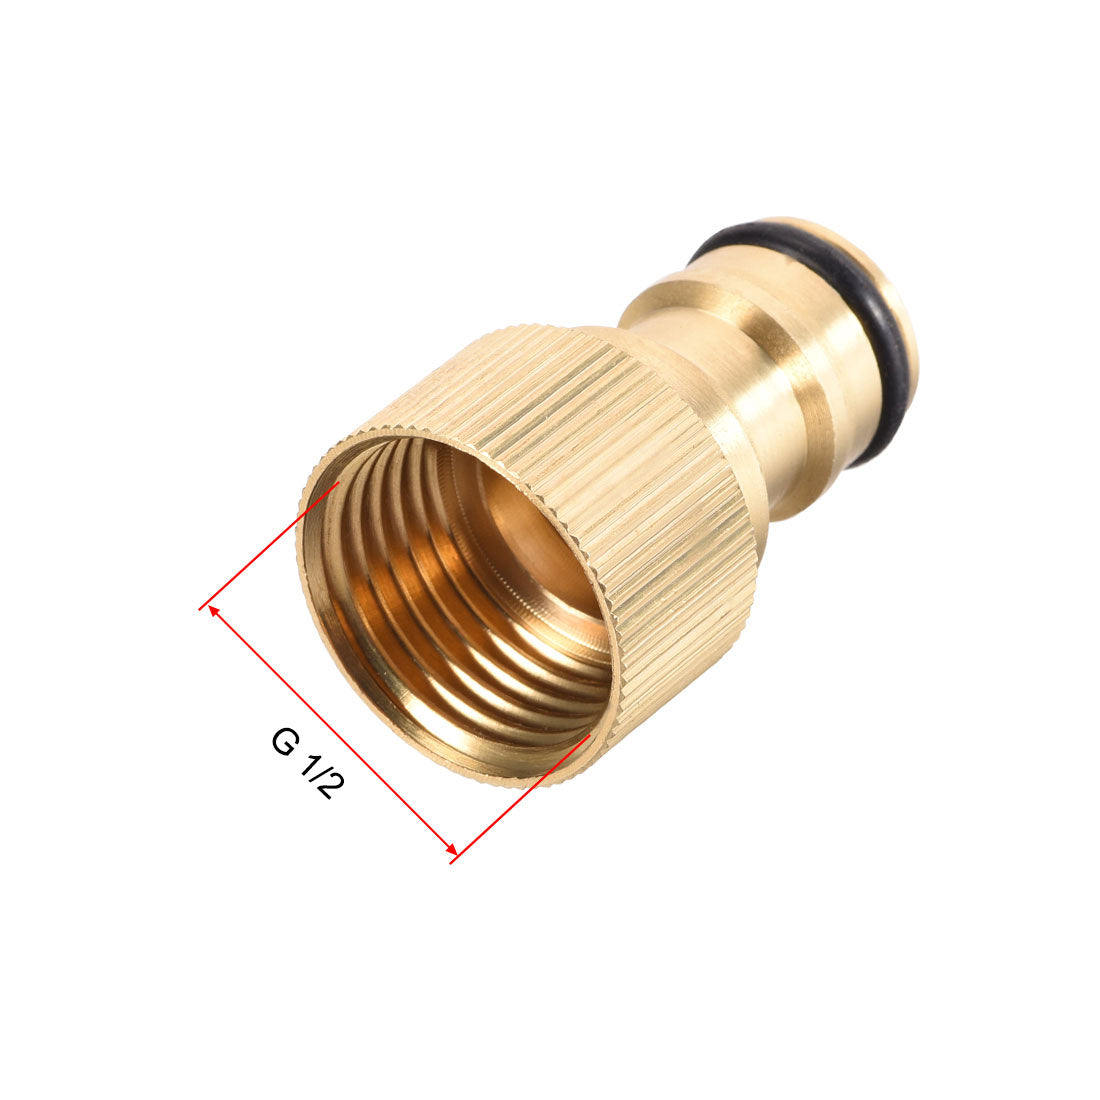 uxcell Uxcell Brass Faucet Tap Quick Connector G1/2 Female Thread Hose Pipe Socket Adapter